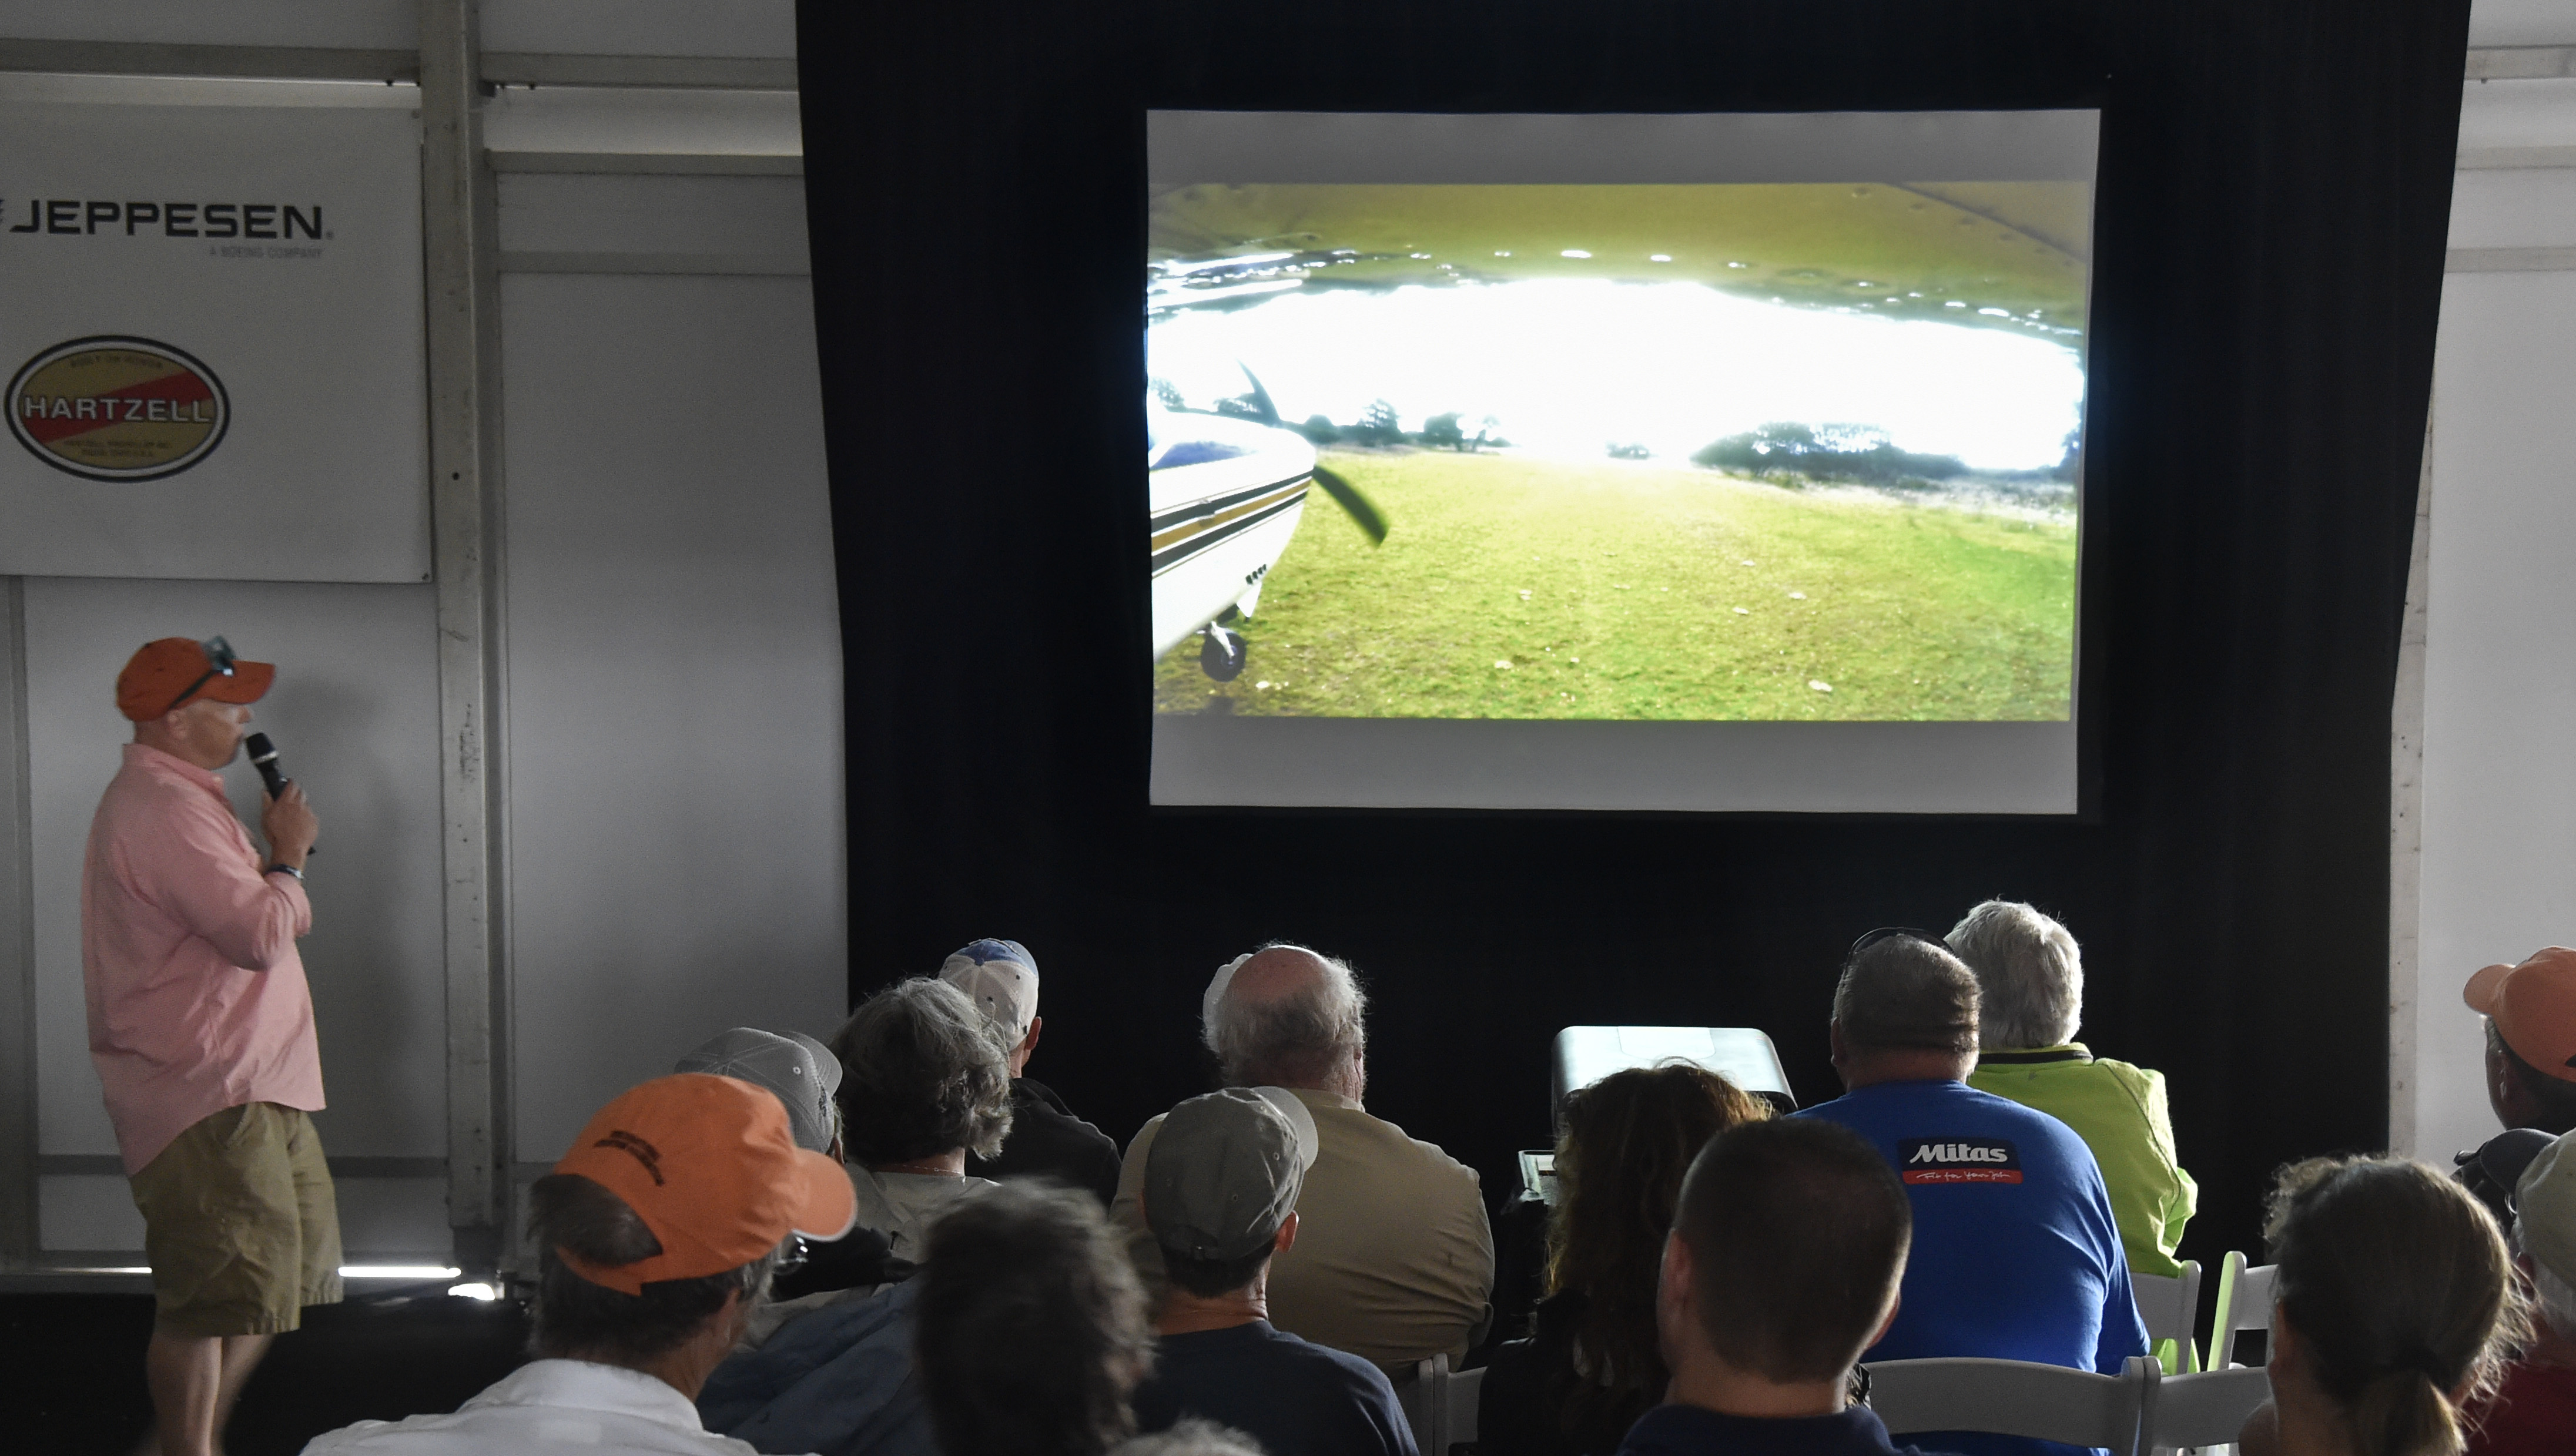 Pilots watch a Tech Talk presentation at EAA AirVenture's Pilot Proficiency Center. Jack Pelton, EAA CEO and chairman, said the association met its goal of 5,000 pilots passing through the learning facility. Photo by David Tulis.